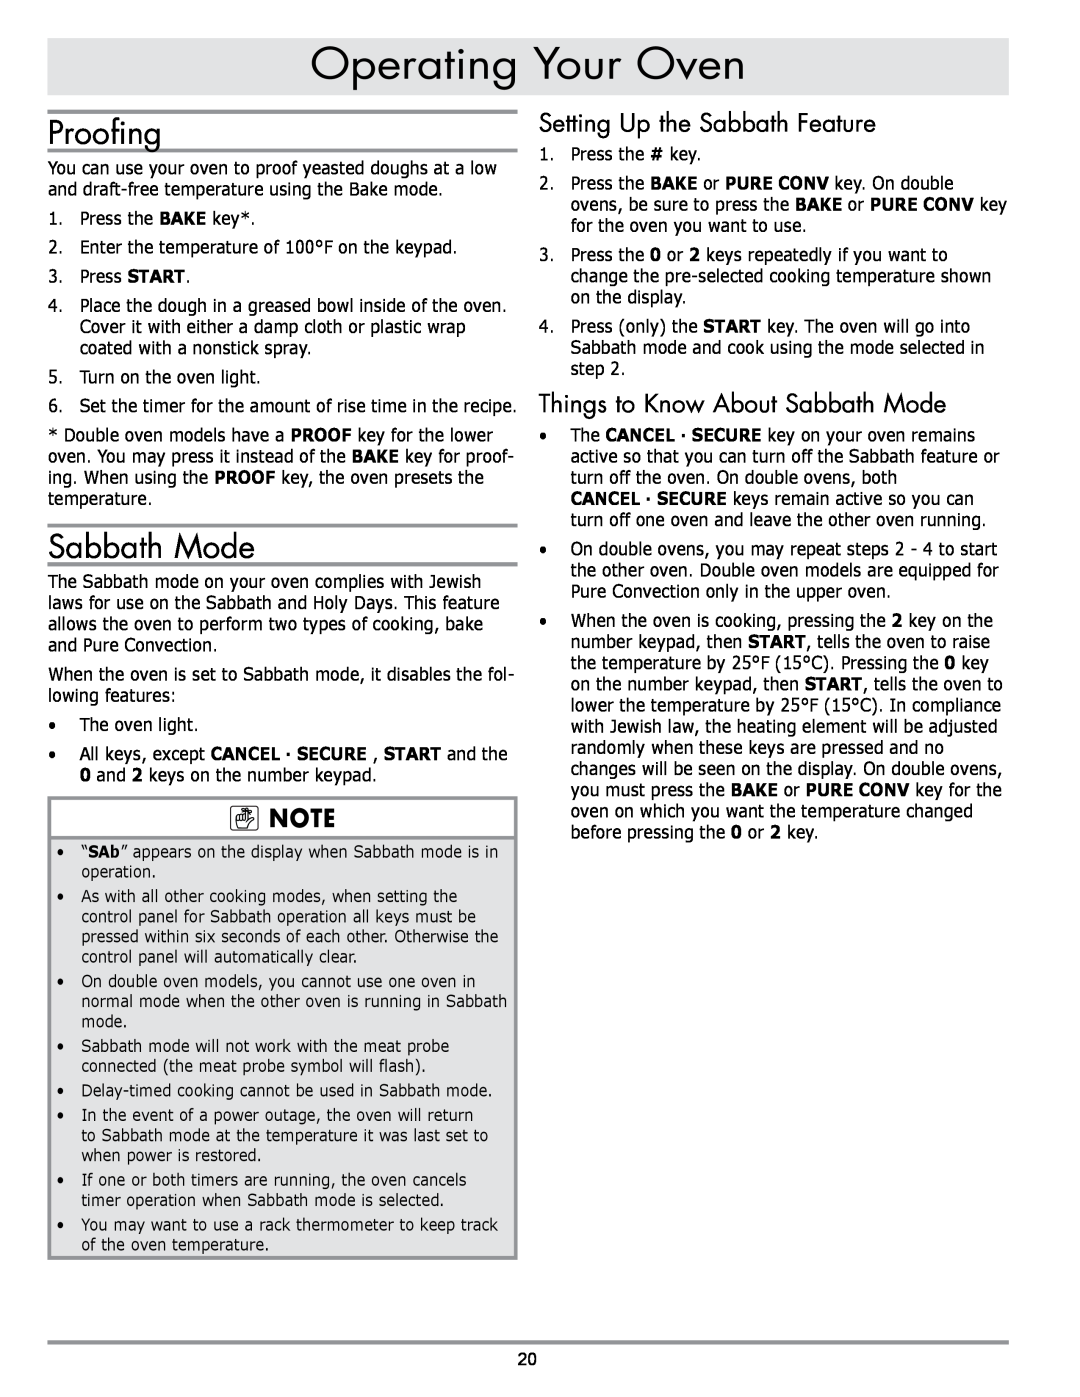 Dacor DO230, DO130 Proofing, Setting Up the Sabbath Feature, Things to Know About Sabbath Mode, Operating Your Oven 